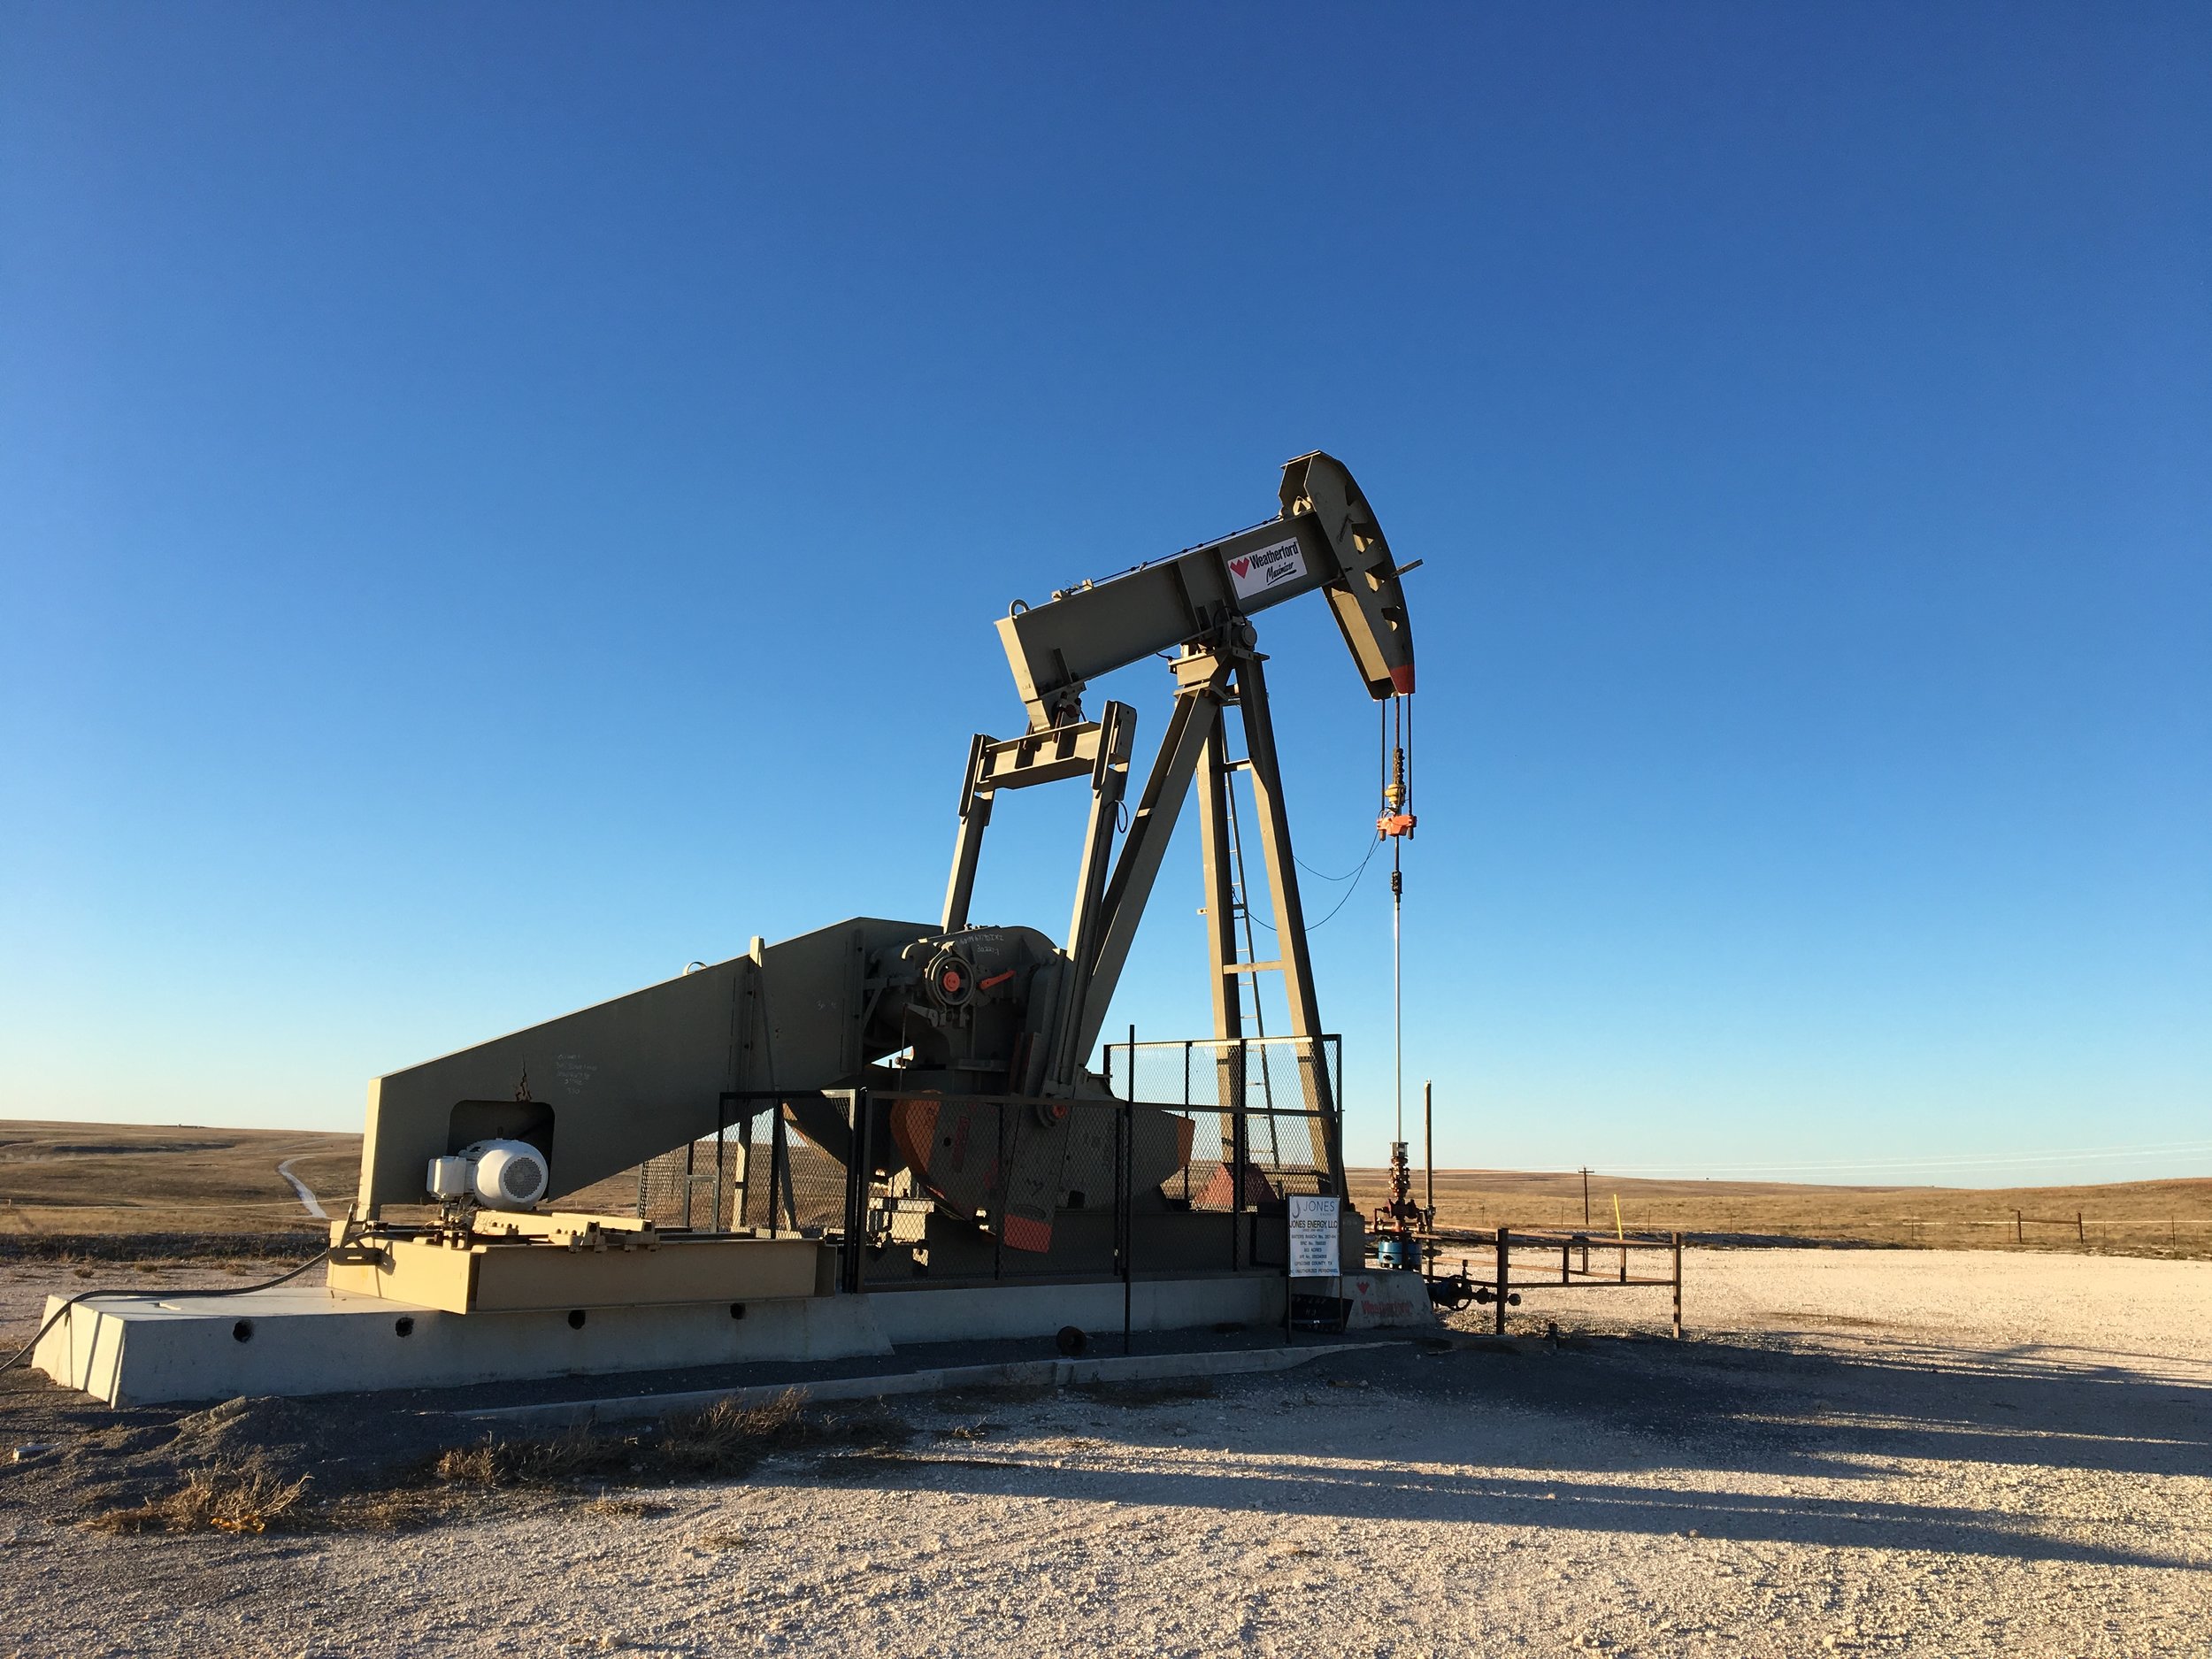 West Texas oil field contains country’s largest ever deposit, says USGS